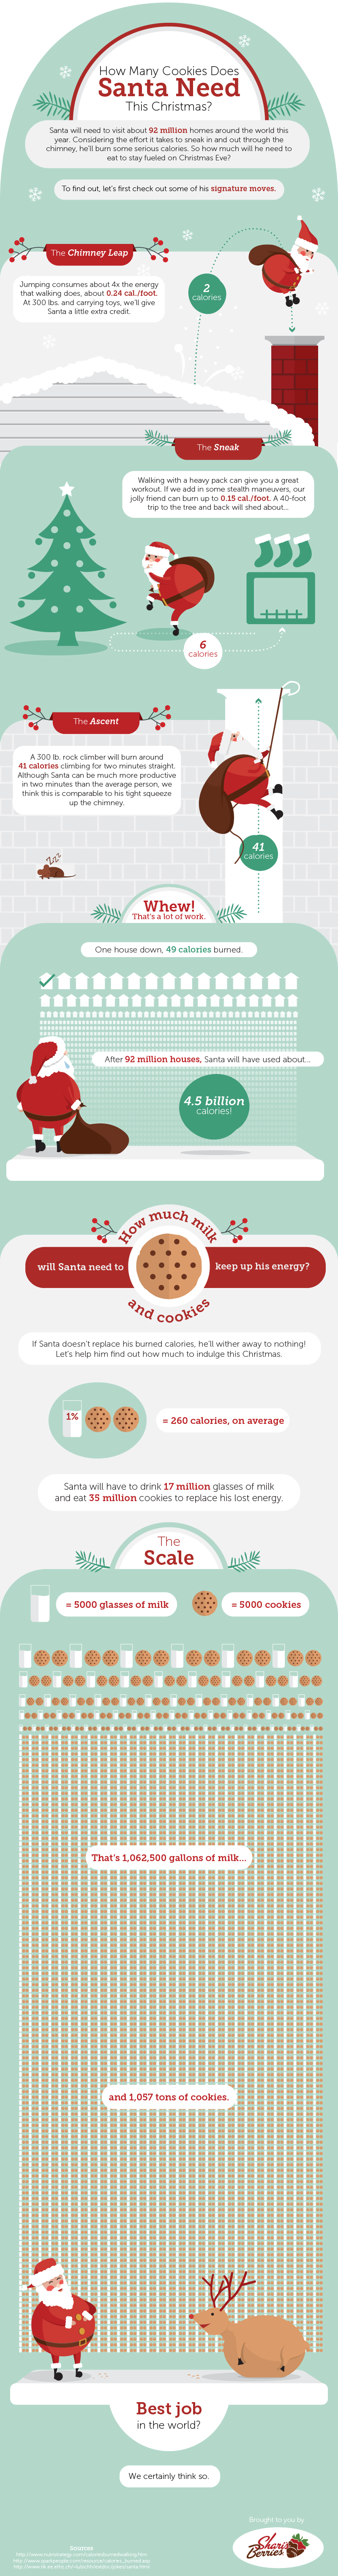 How Many Cookies Does Santa Need This Christmas